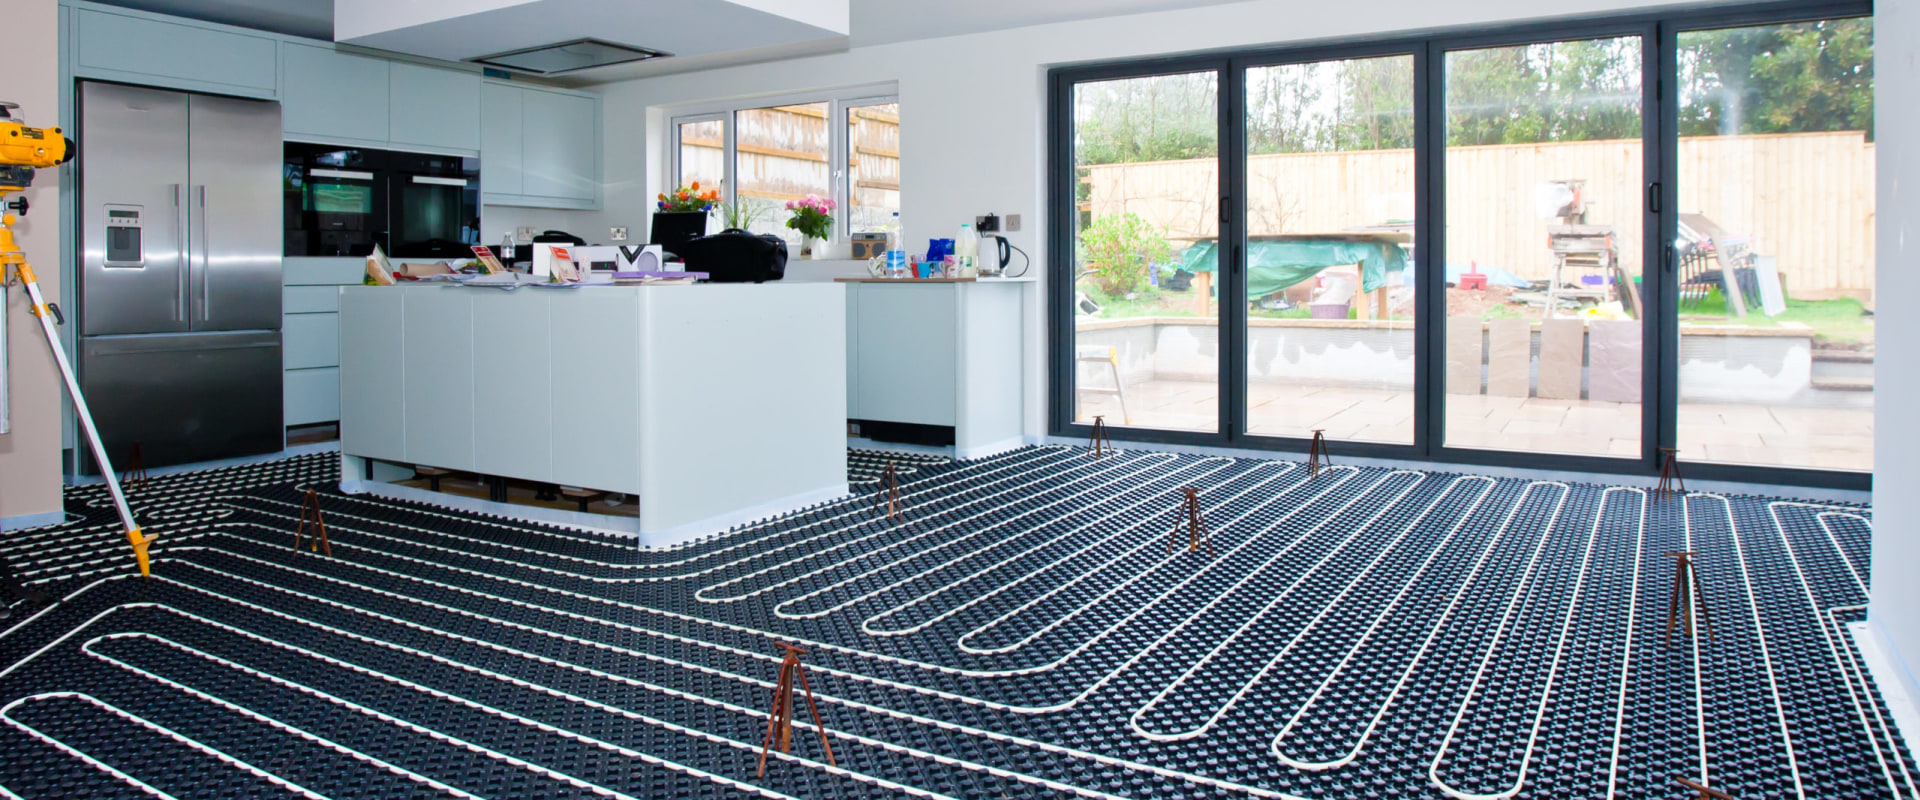 Can you turn underfloor heating on and off?